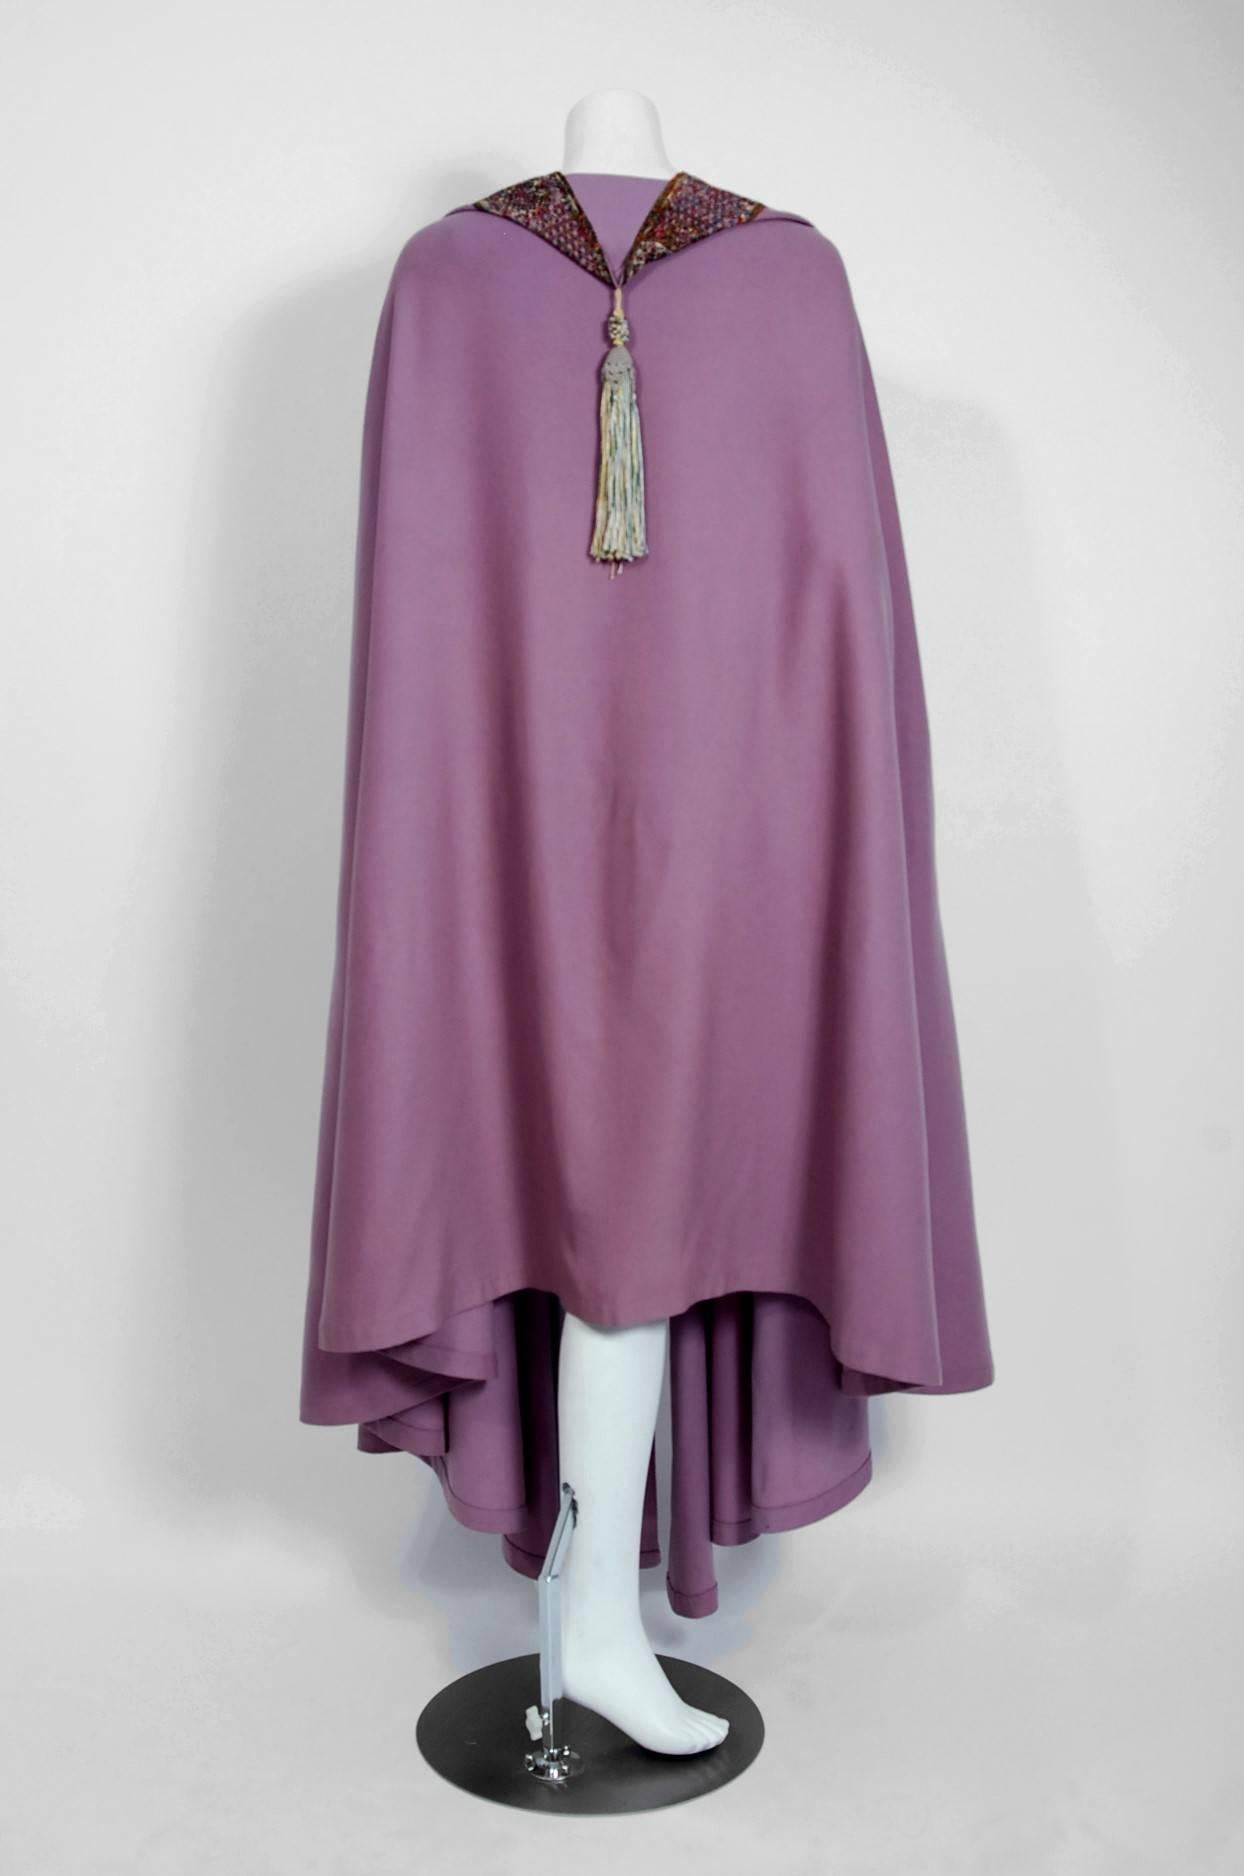 Vintage 1915 Liberty Paris Couture Lilac Wool & Colorful Lace Art-Nouveau Cape In Good Condition For Sale In Beverly Hills, CA